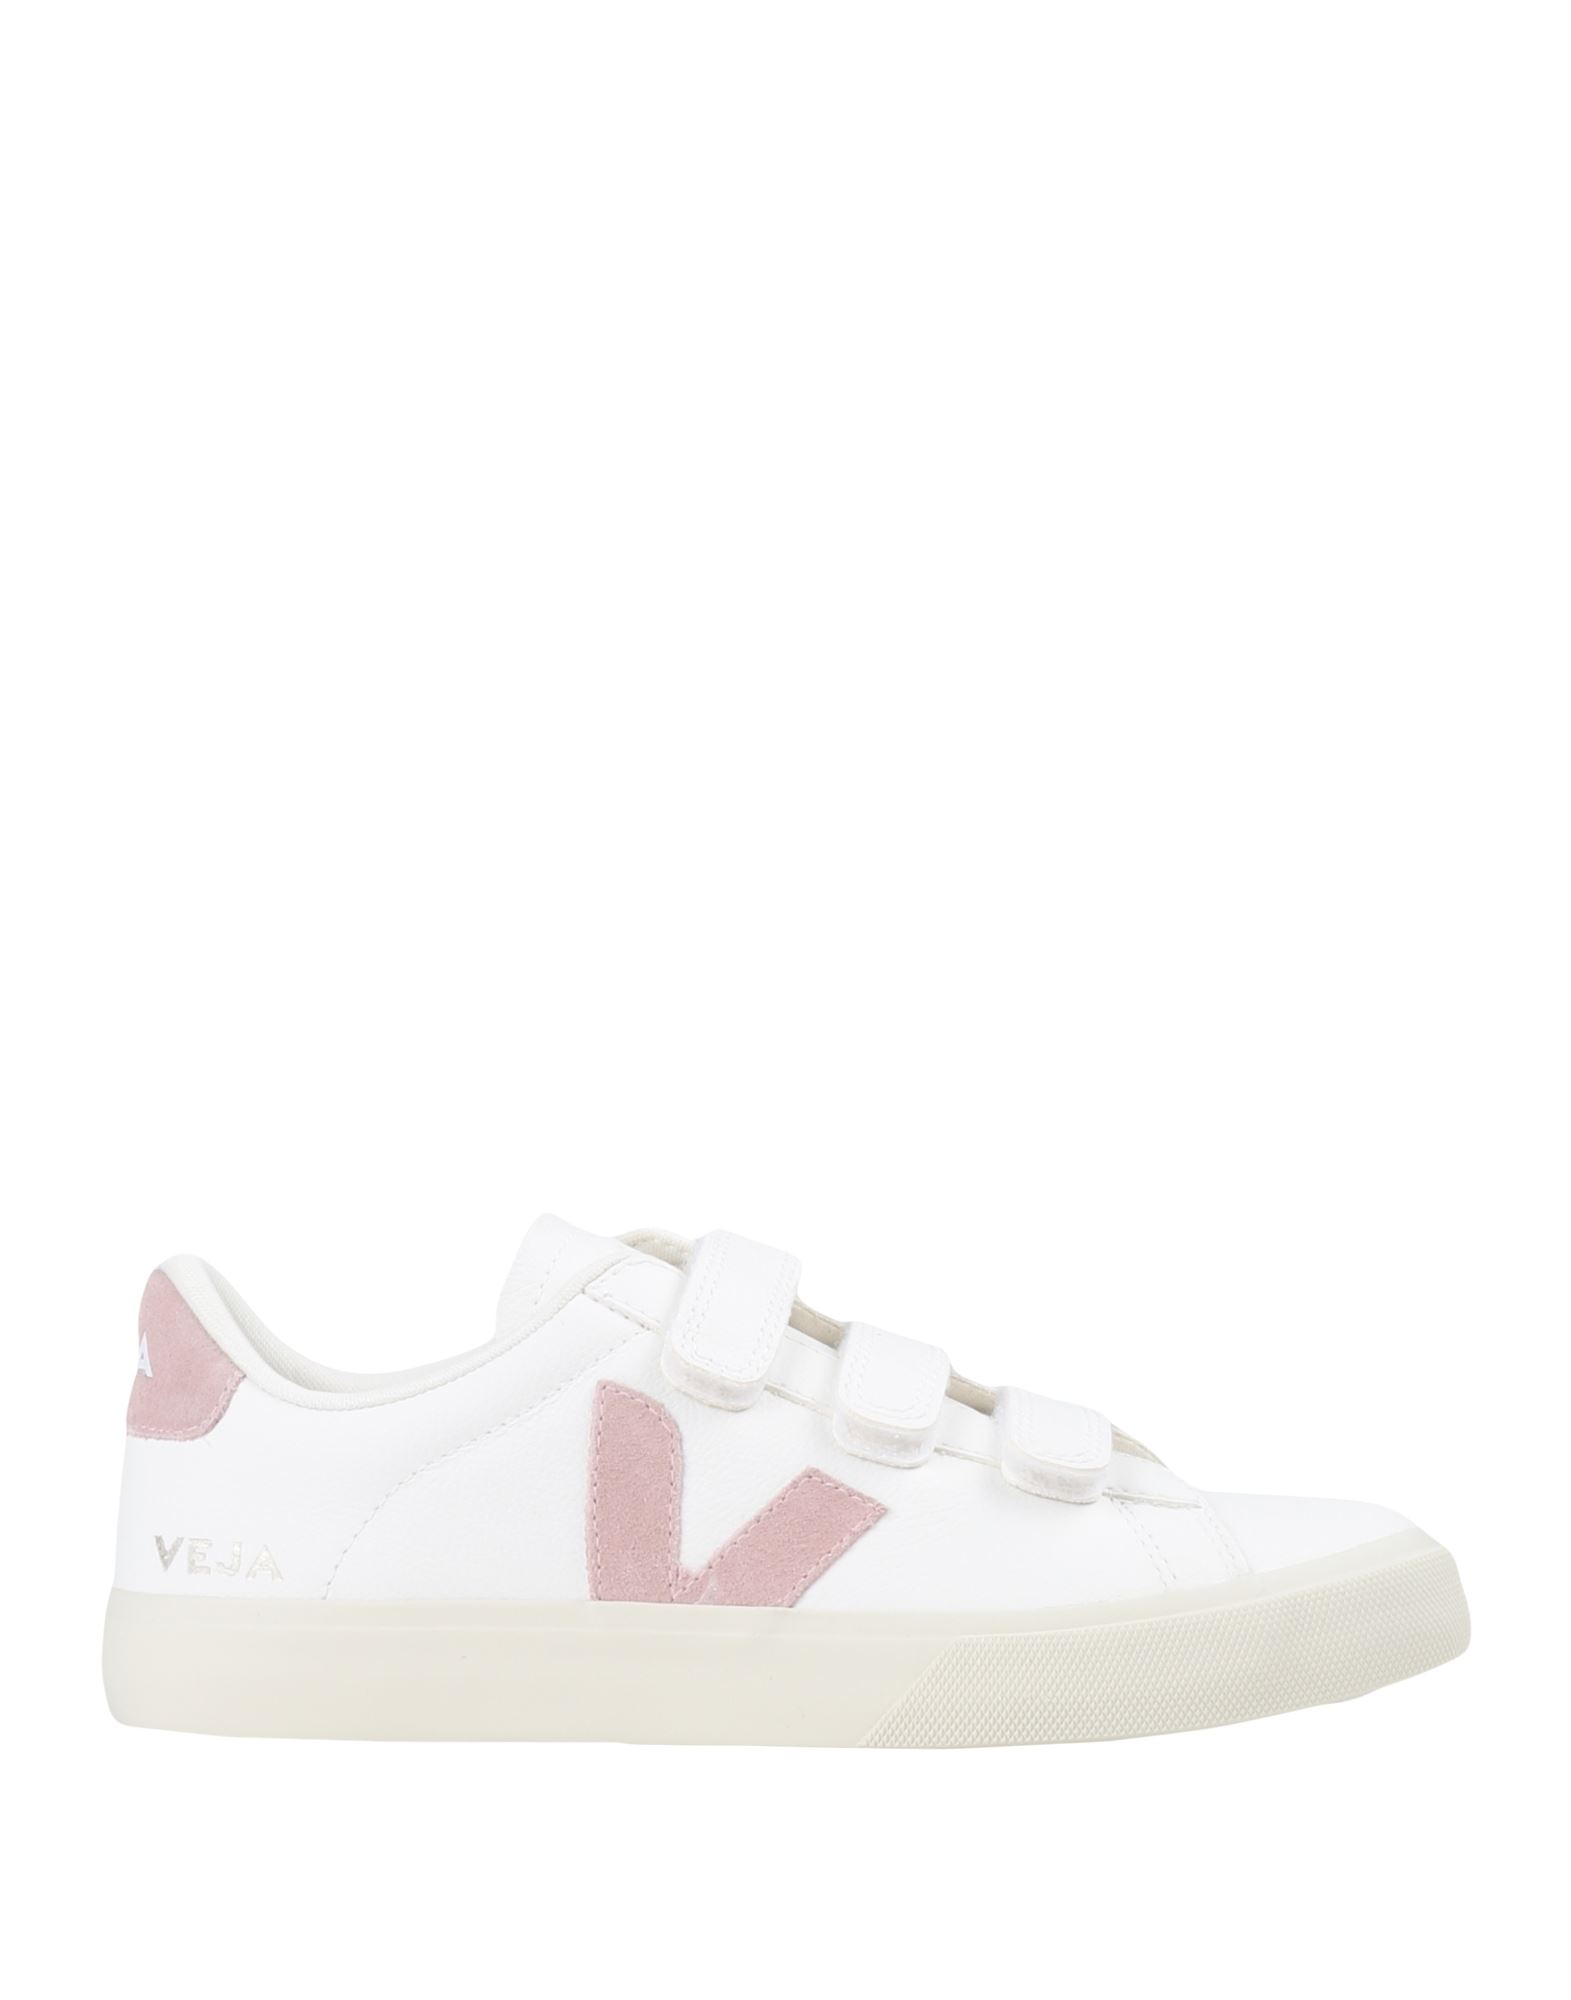 Shop Veja Recife Woman Sneakers White Size 6.5 Soft Leather